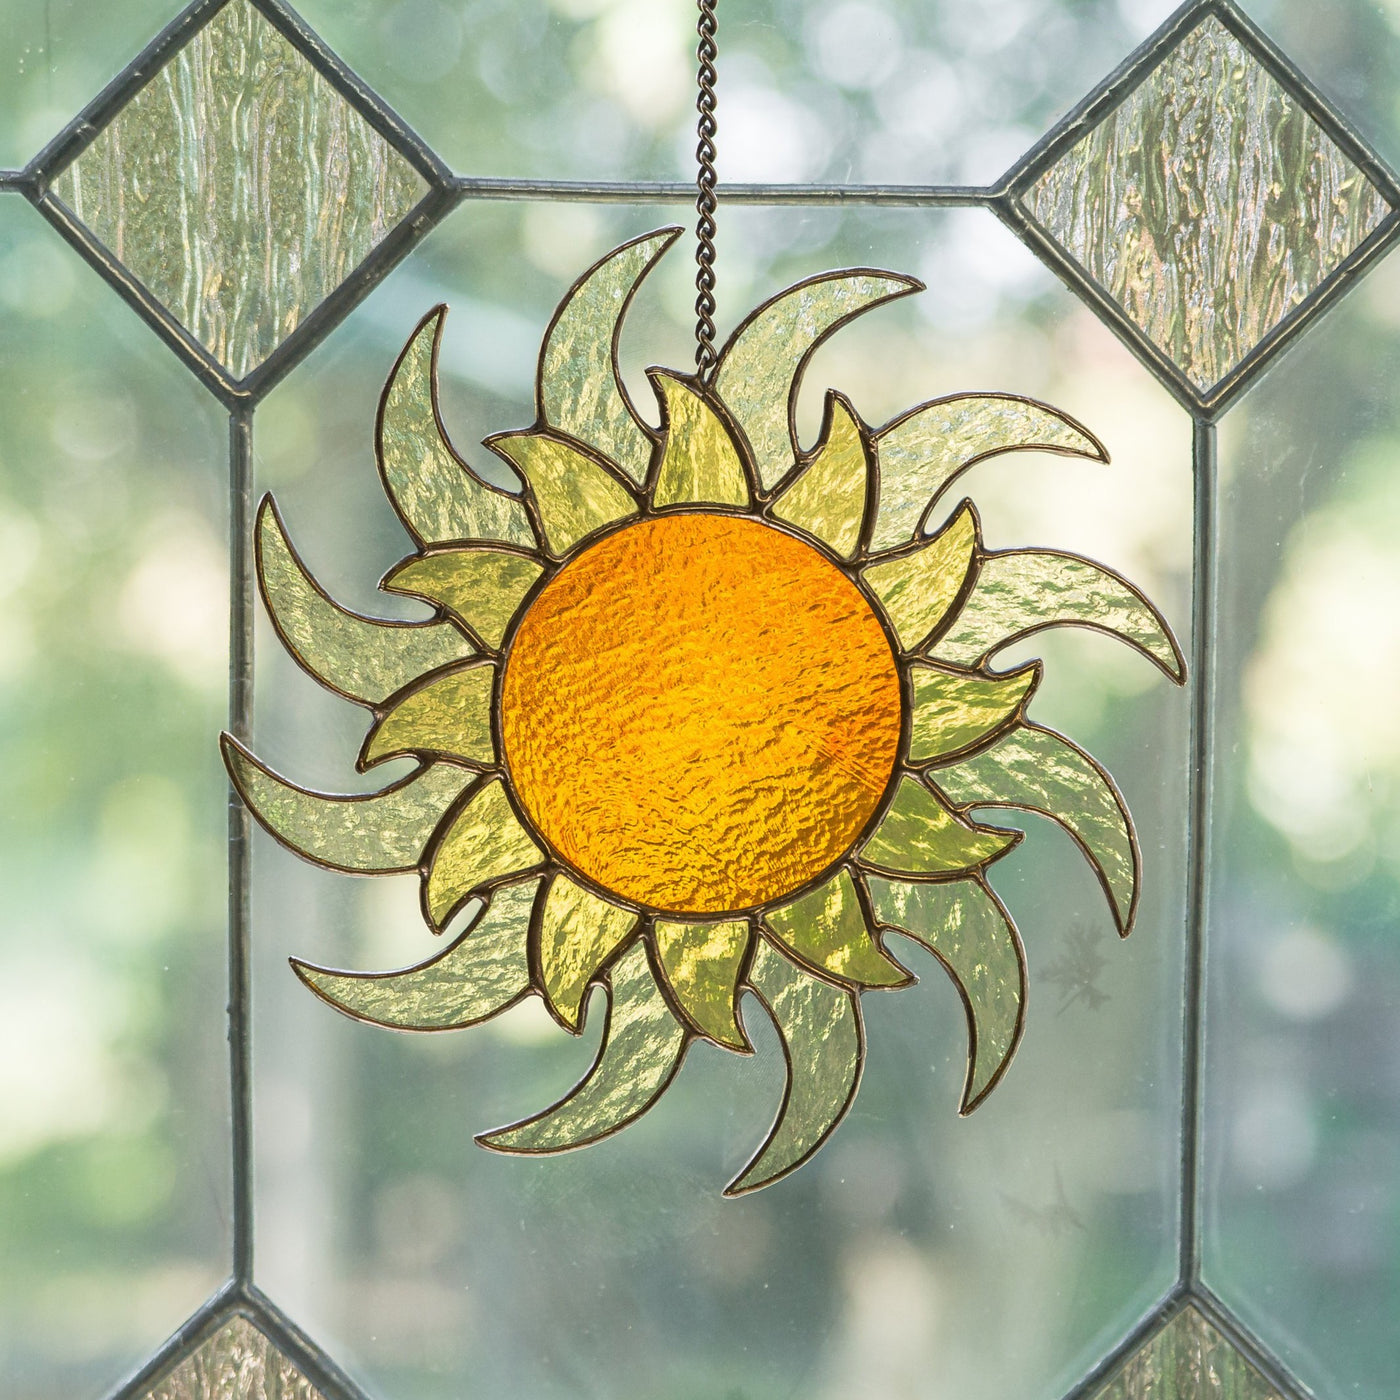 Window hanging of a stained glass shining sun